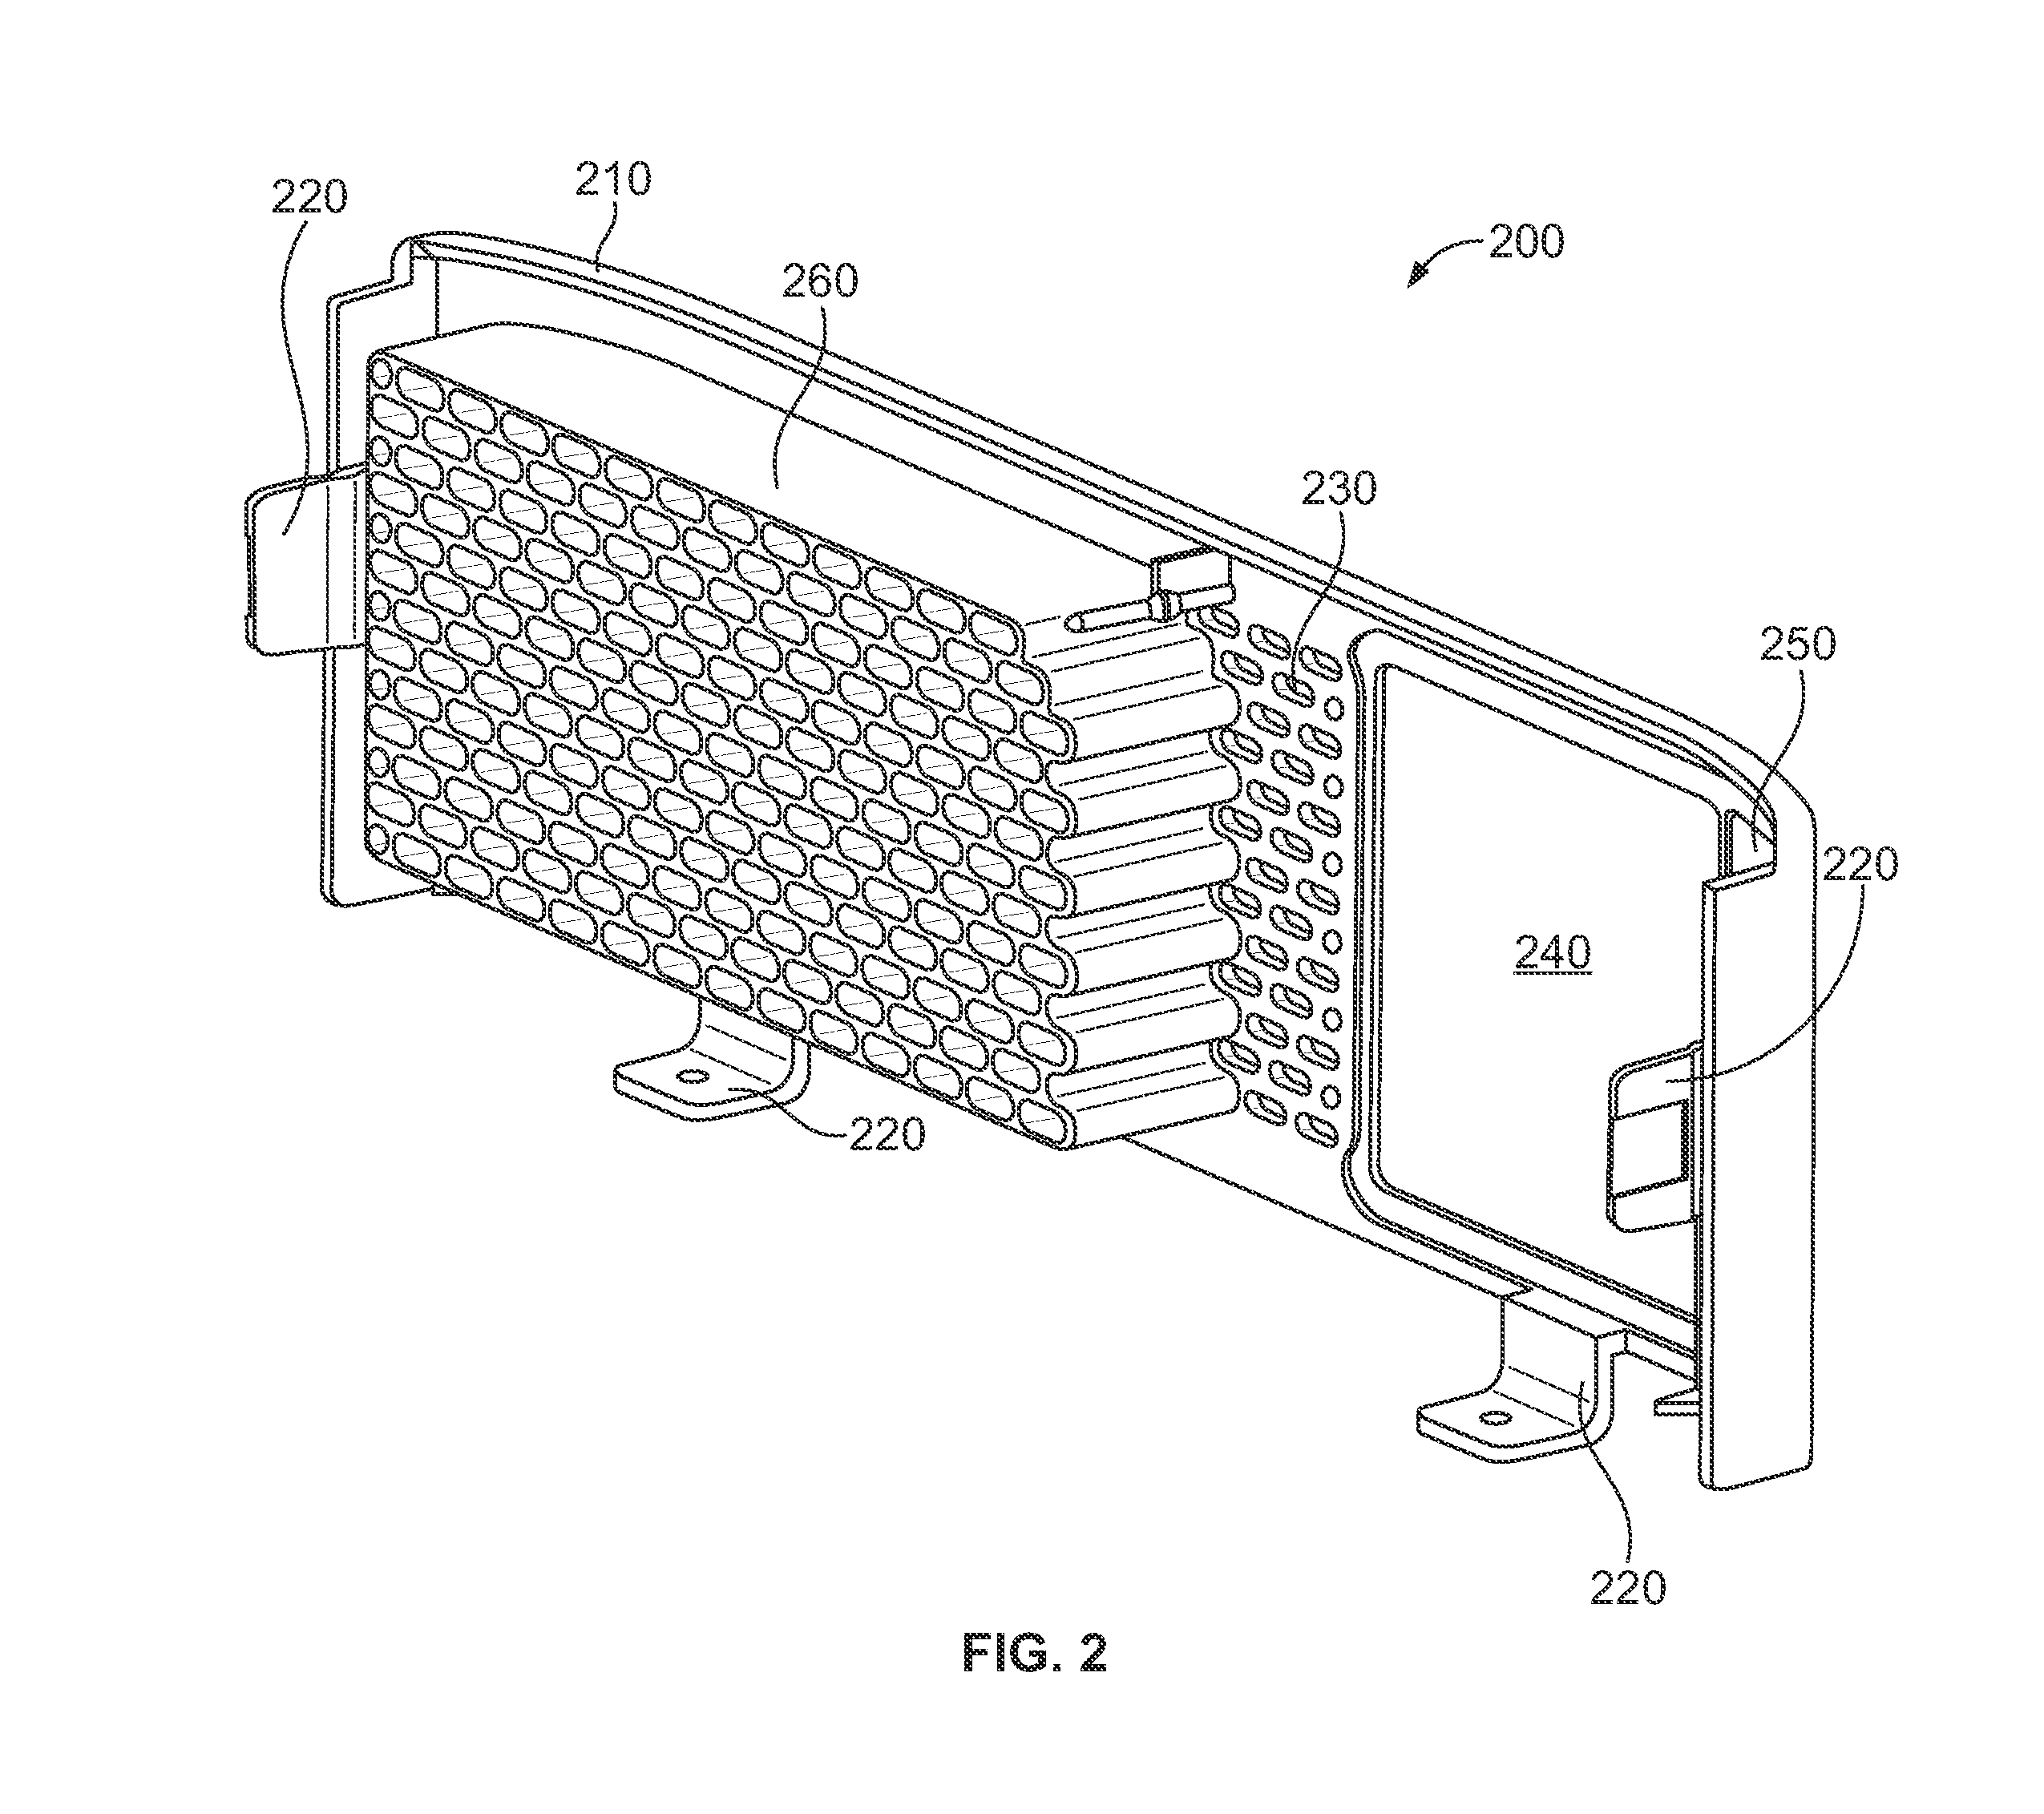 Noise-Reducing Air Inlet Grille for an Appliance